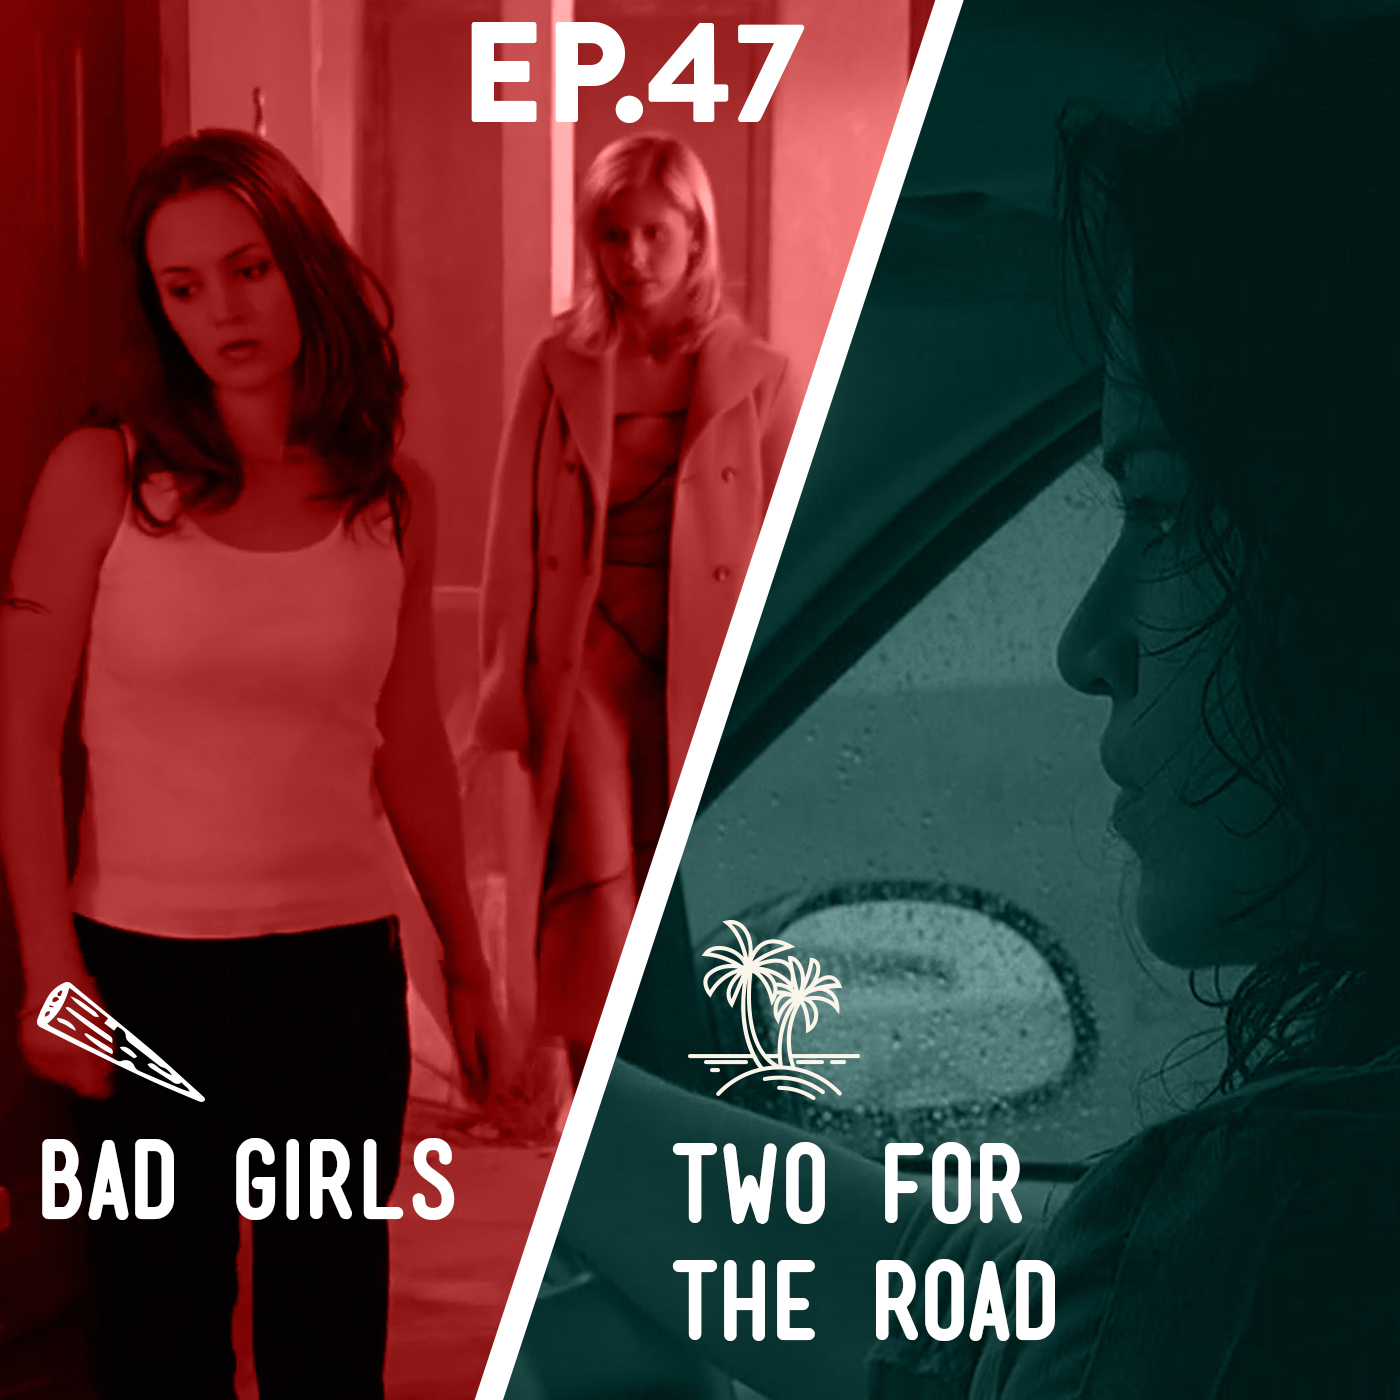 47 - Bad Girls / Two for the Road